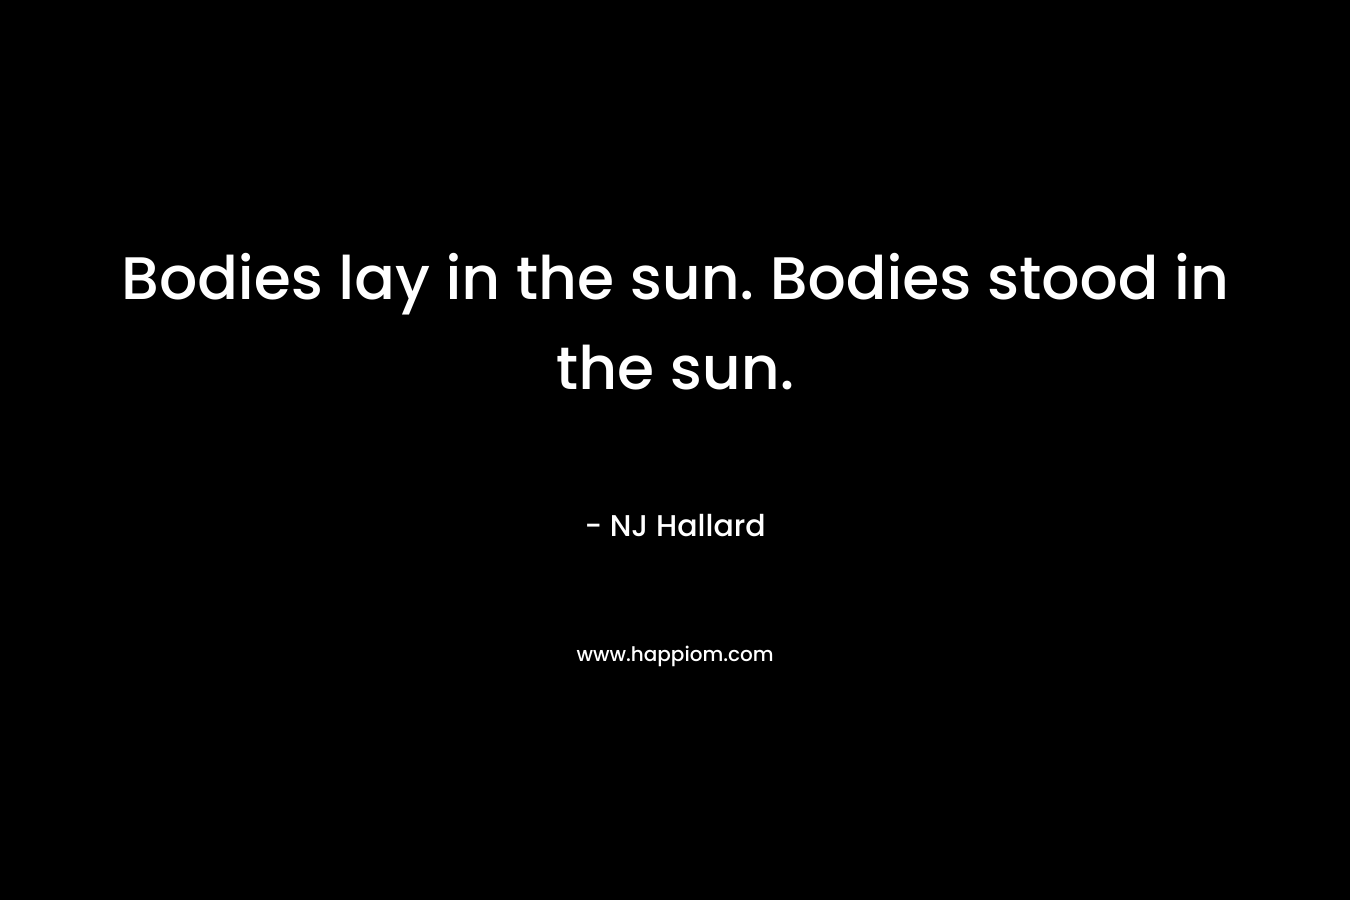 Bodies lay in the sun. Bodies stood in the sun.